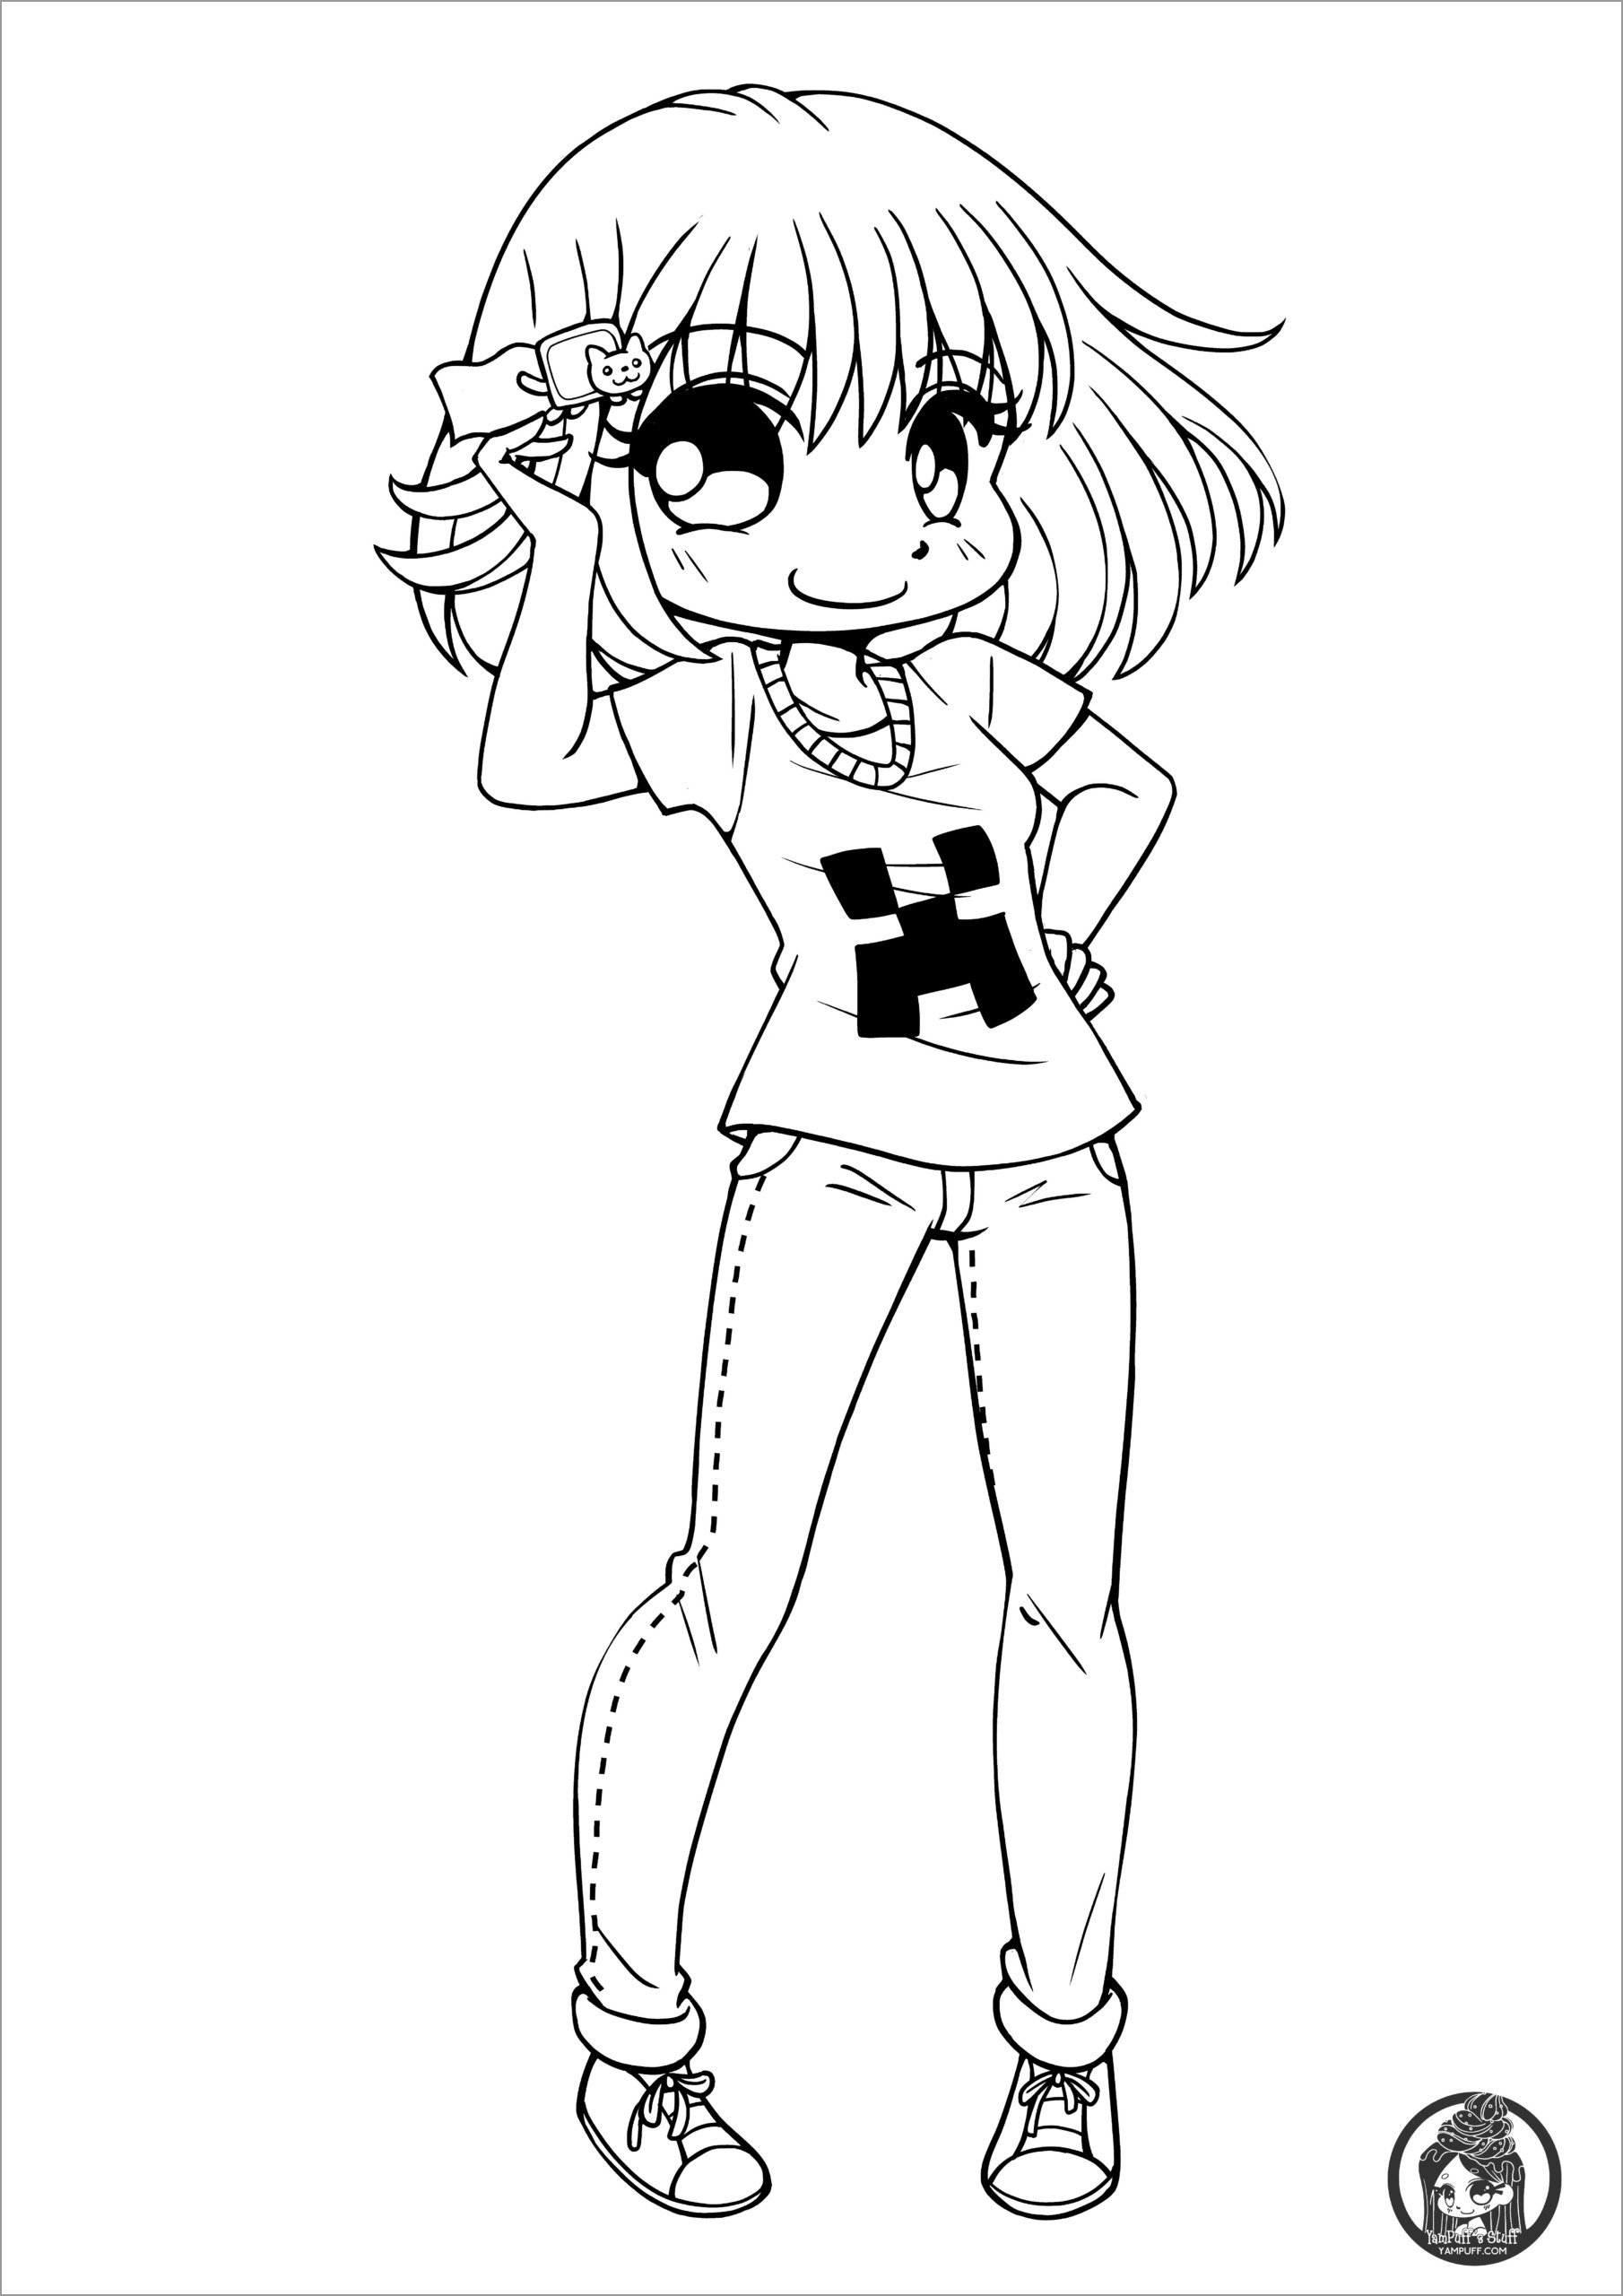 Chibi Girl Coloring Pages   ColoringBay